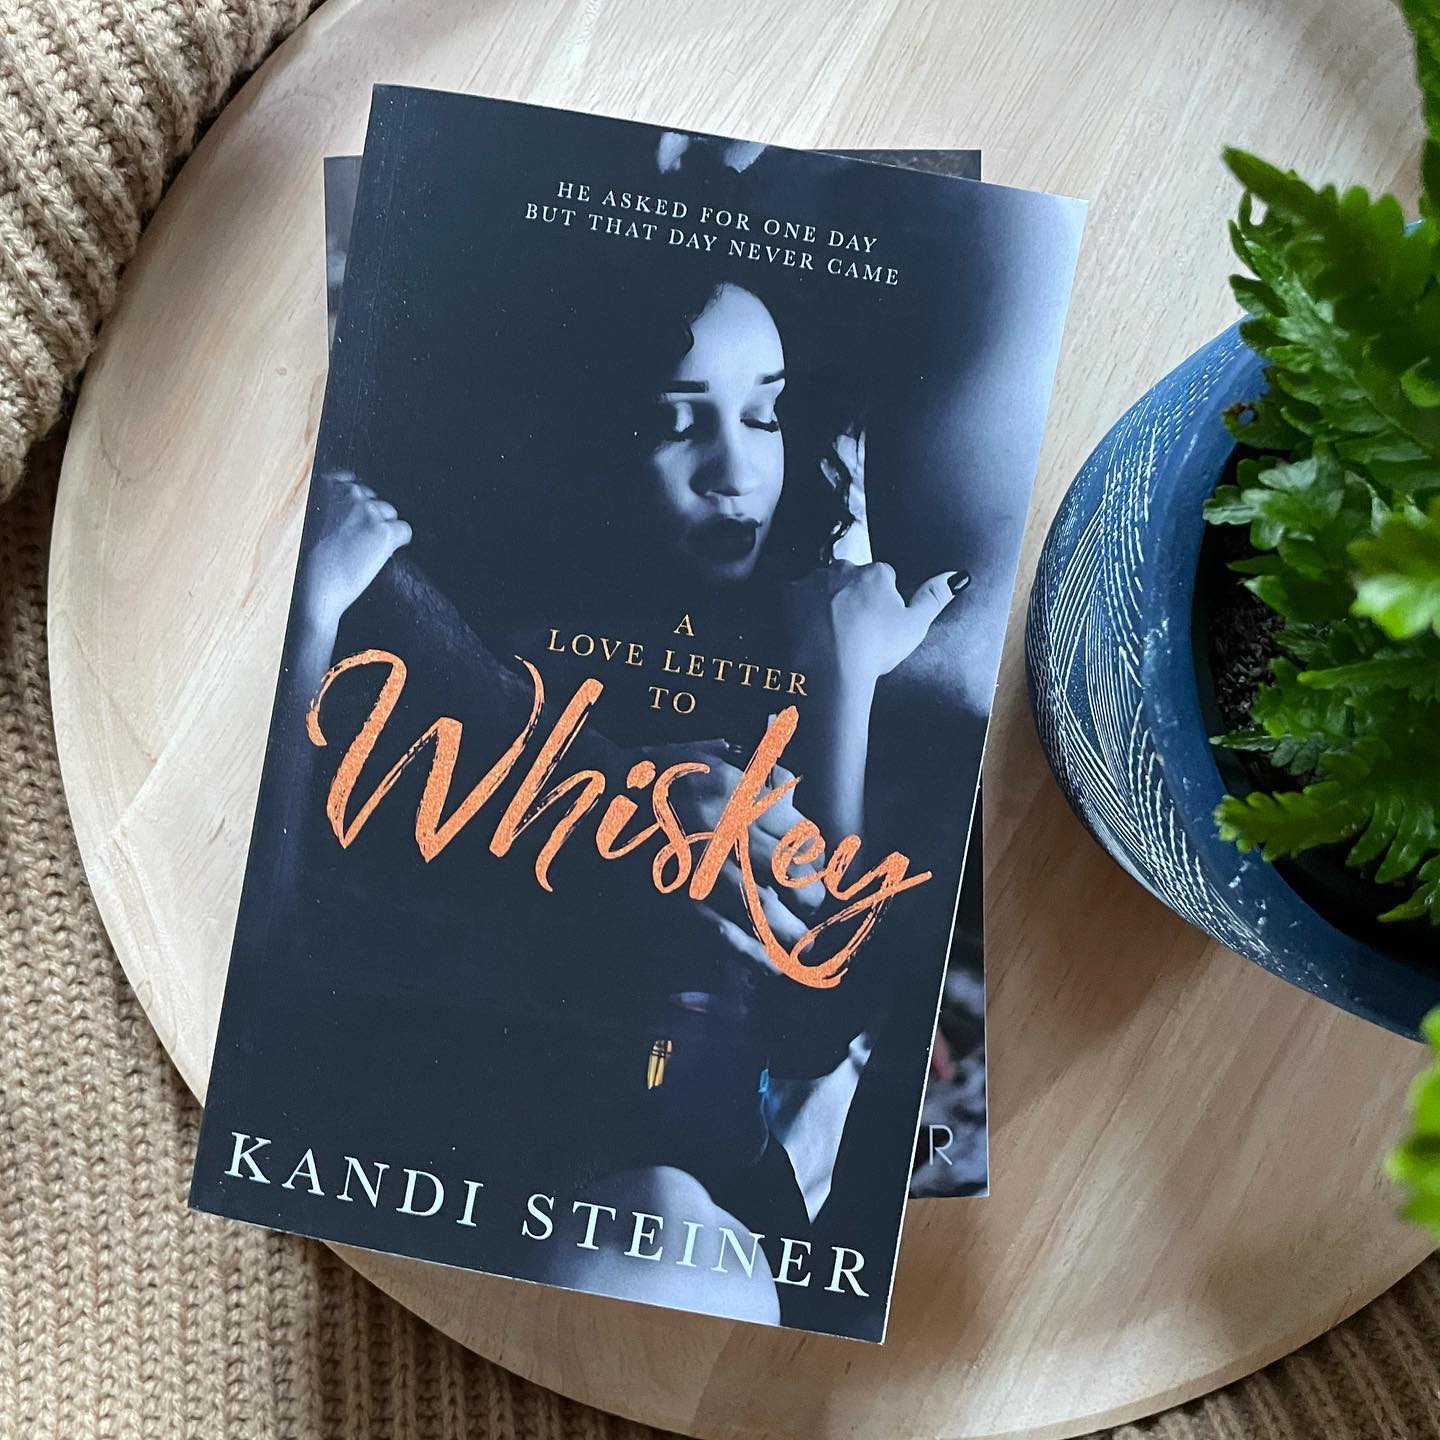 A Lover Letter to Whiskey by Kandi Steiner